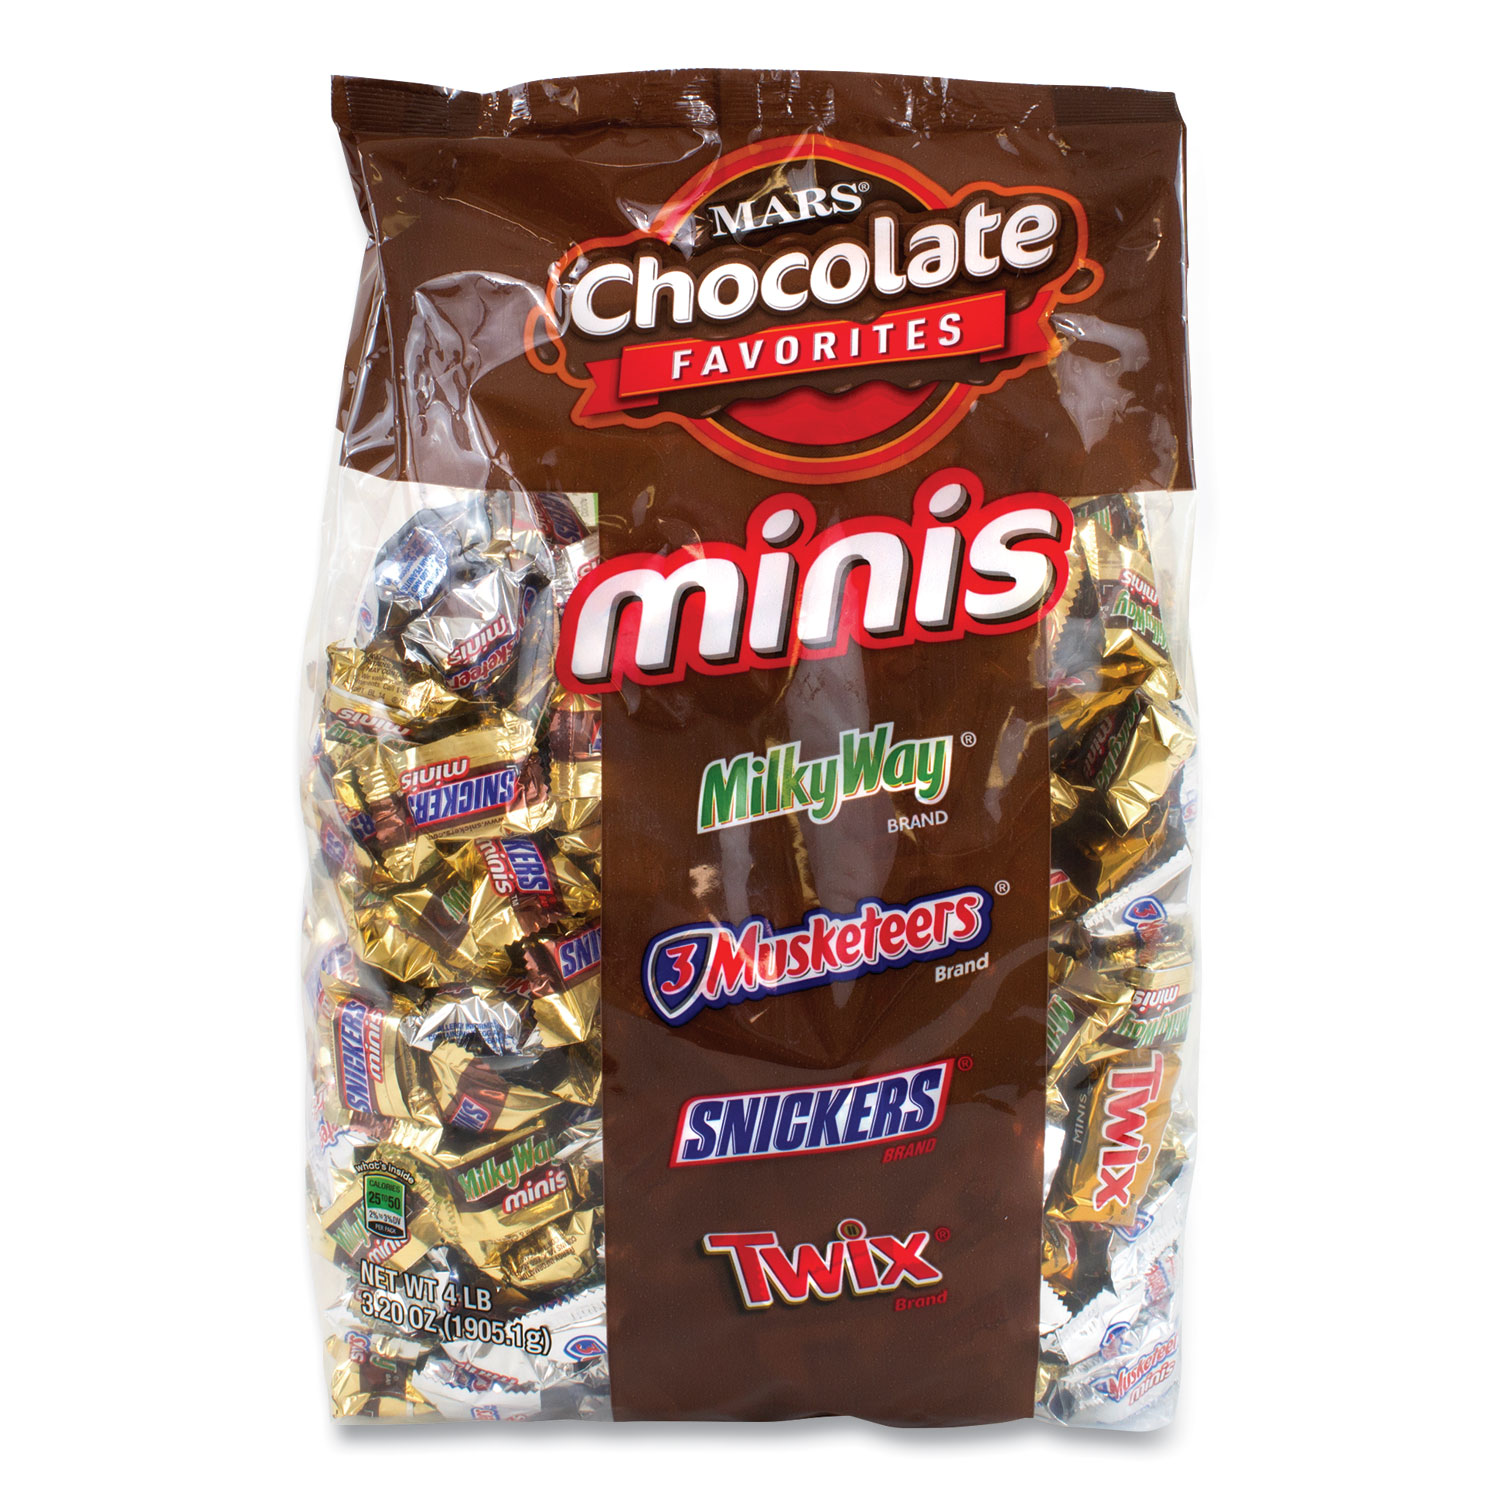  MARS 329609 Chocolate Favorites Minis Variety Mix, 240 Pieces, 67.2 oz Bag, Free Delivery in 1-4 Business Days (GRR20900379) 